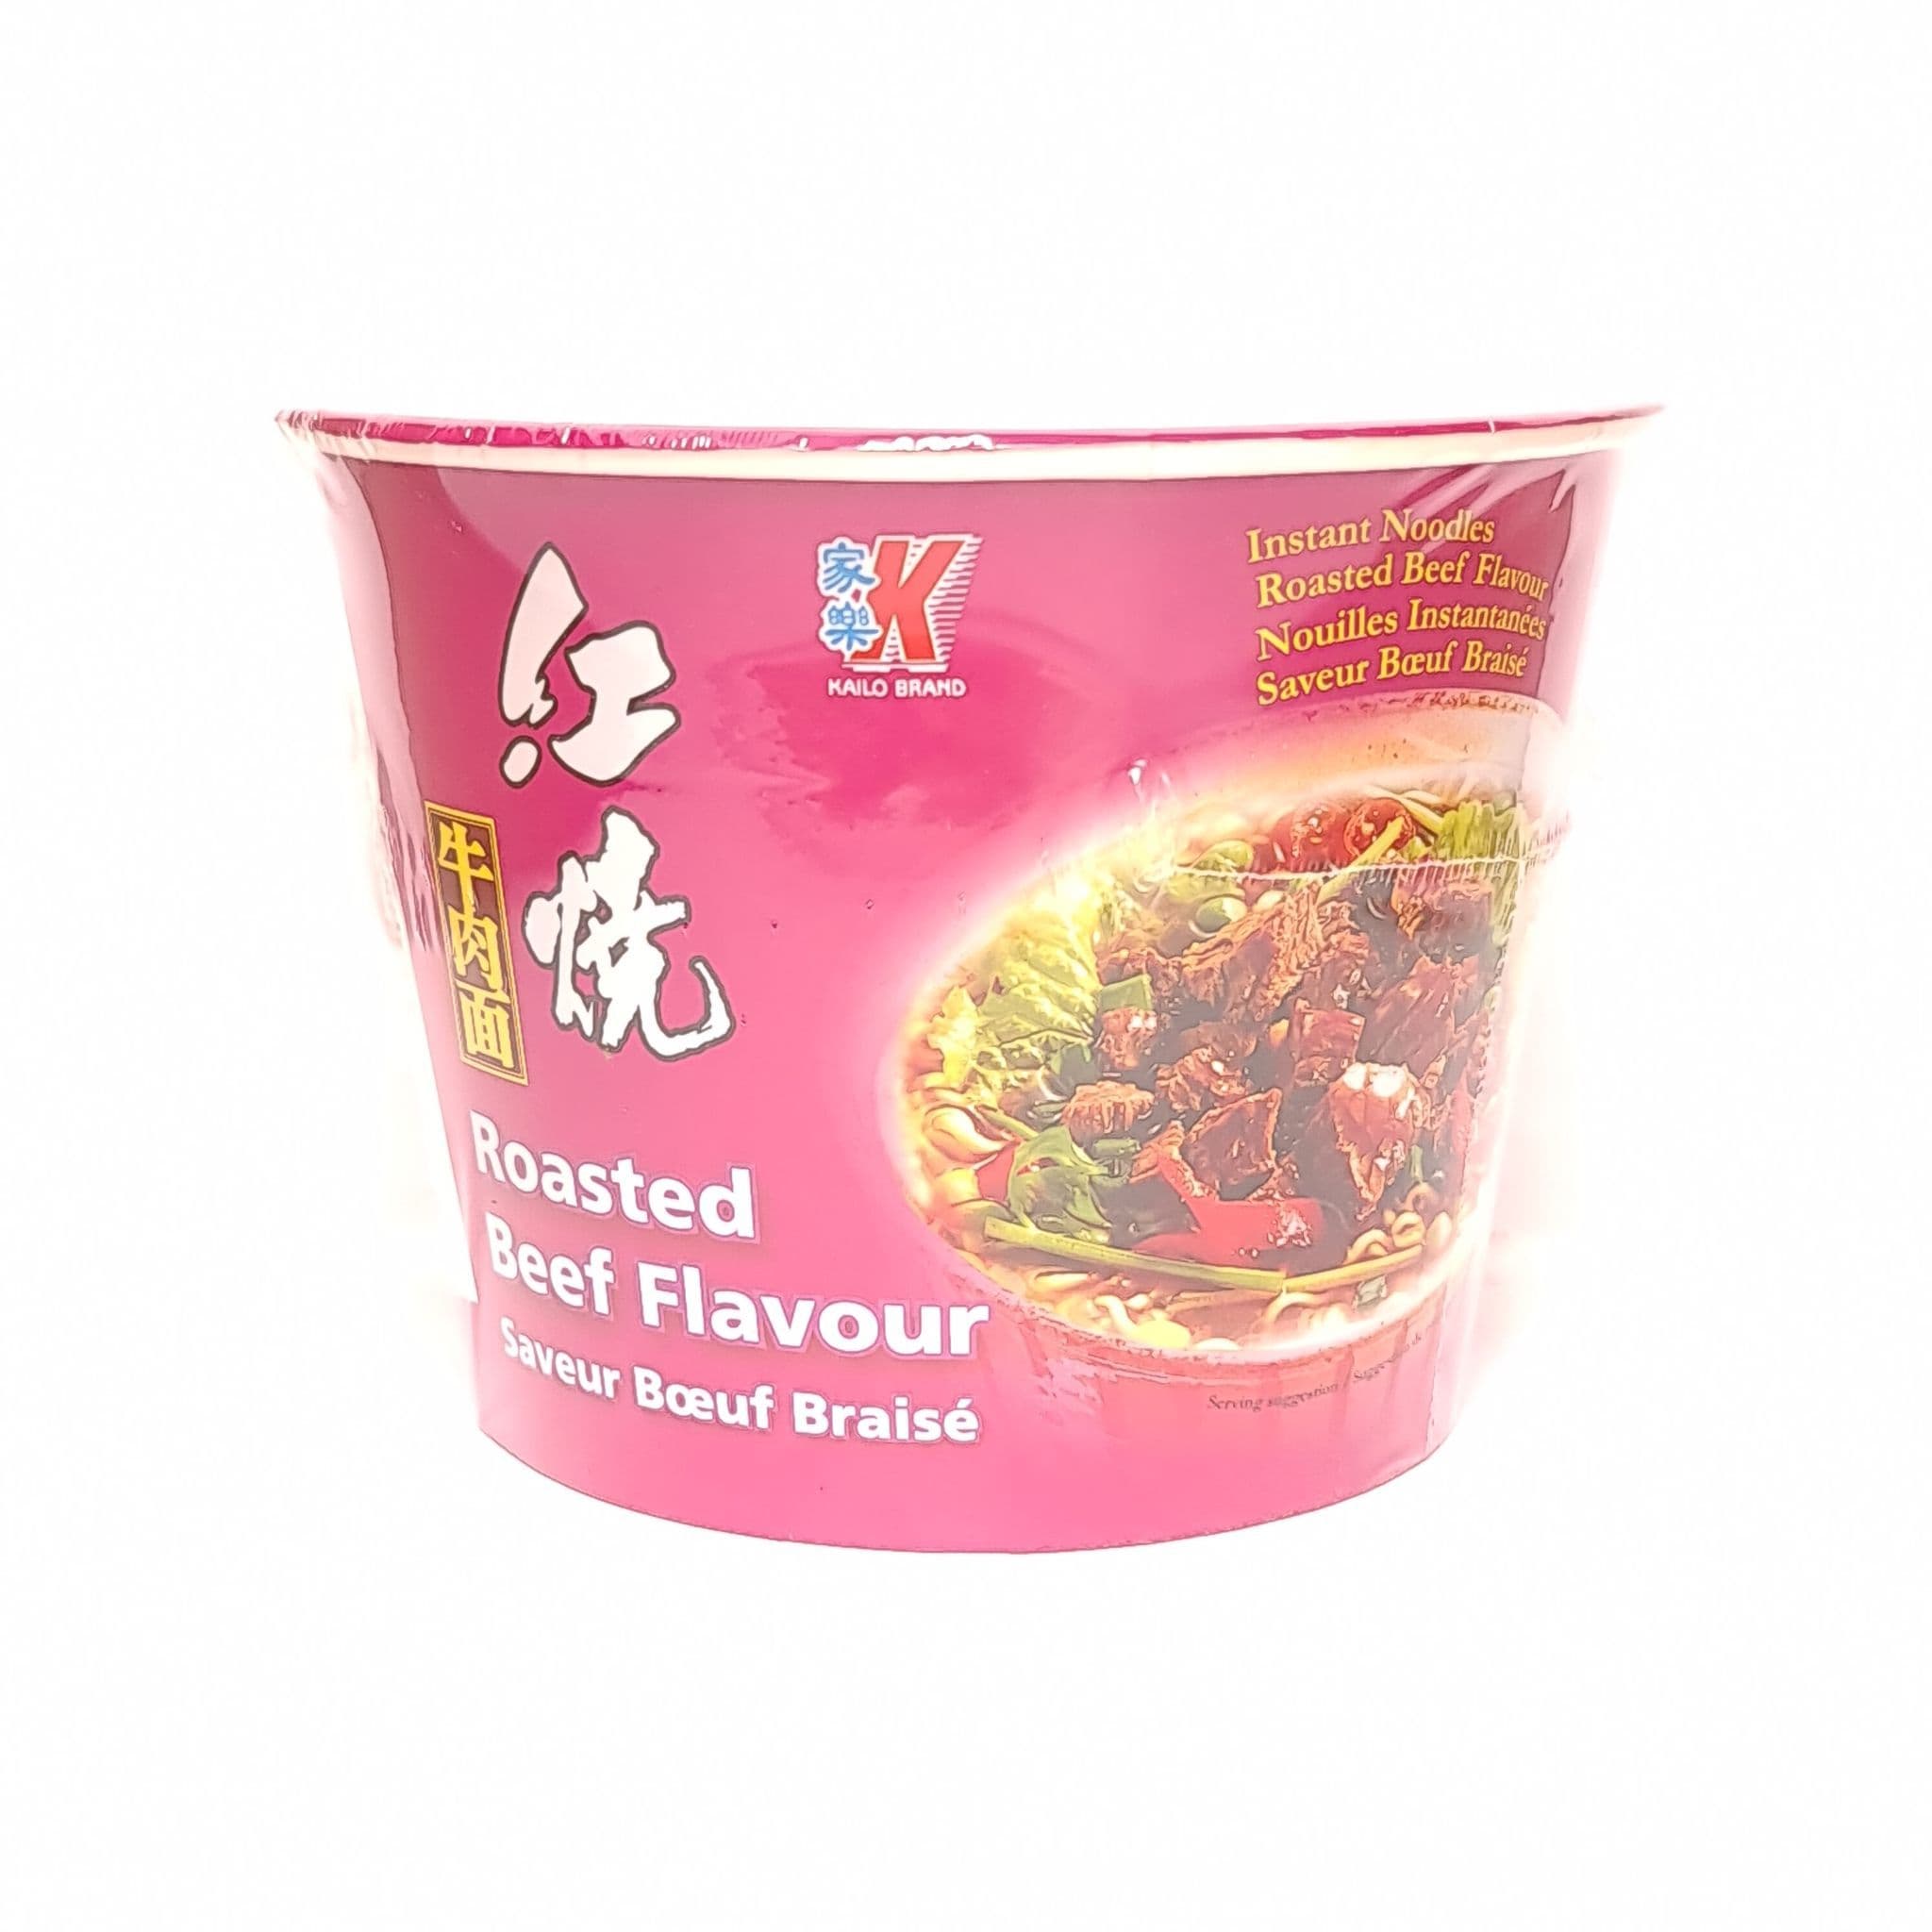 KAILO BRAND ROASTED BEEF FLAVOUR